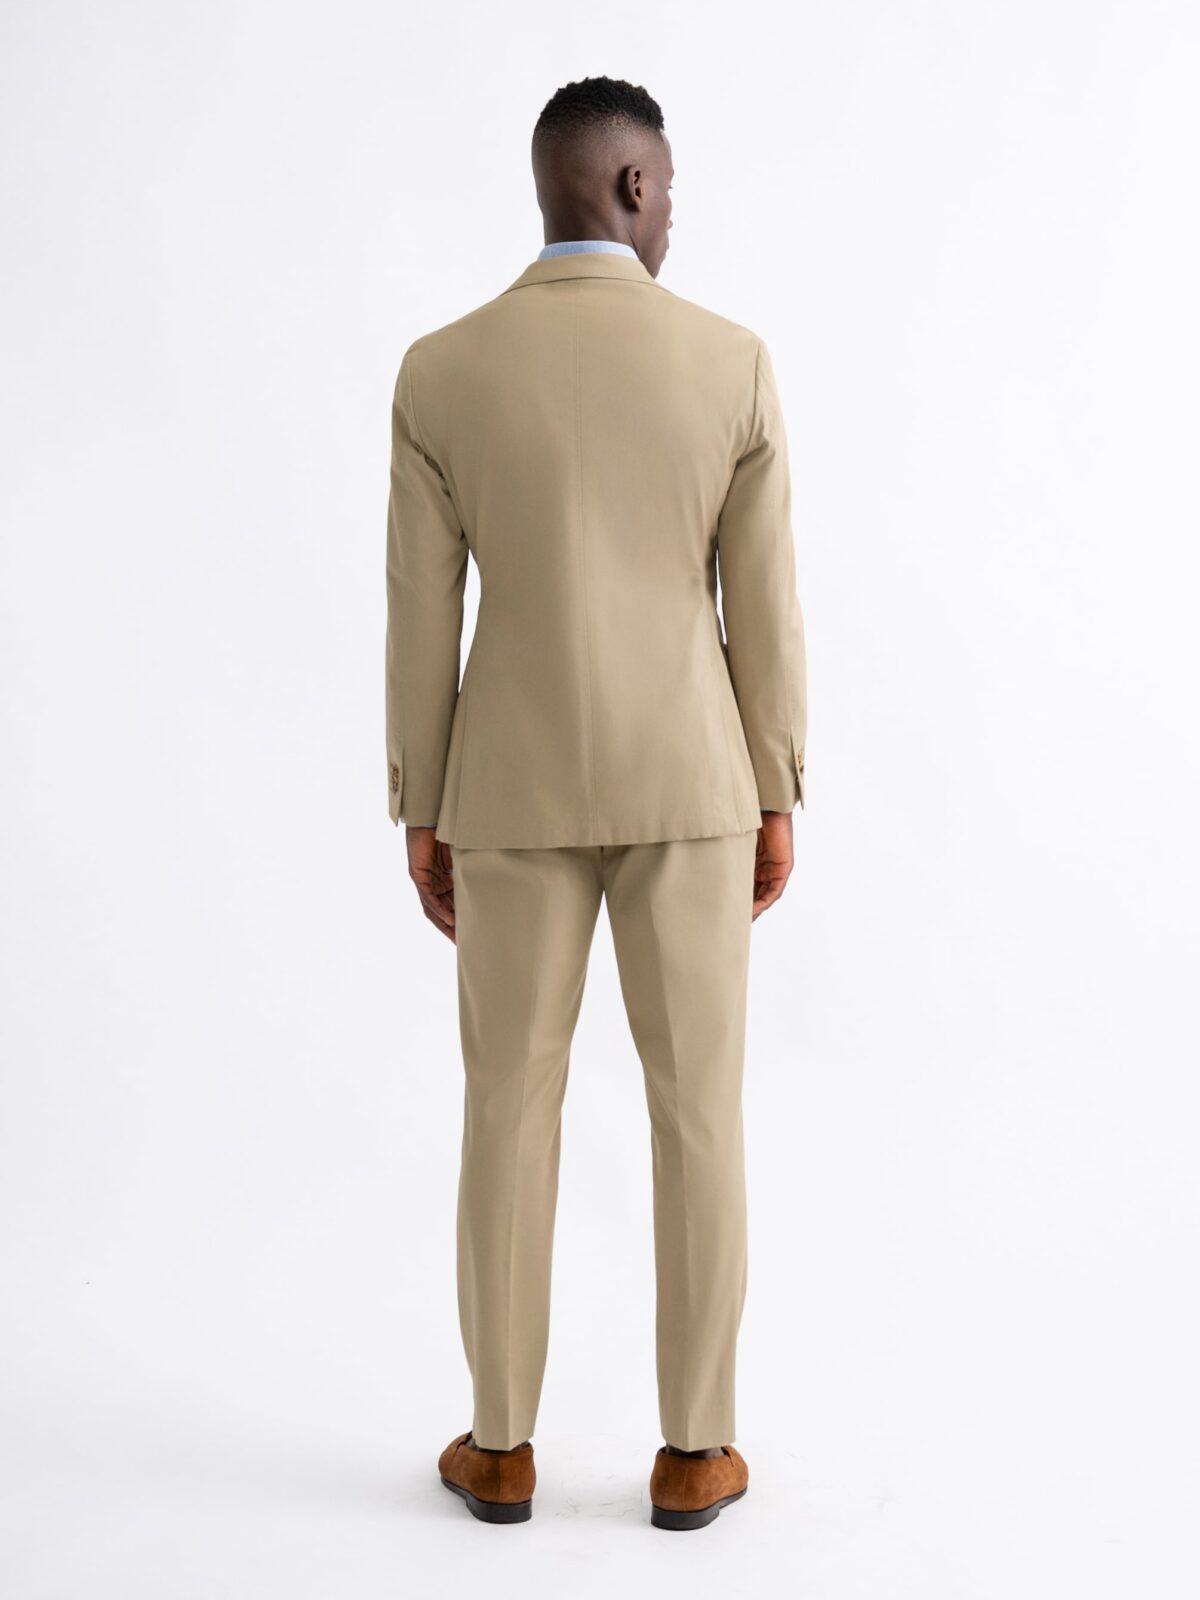 Beige Stretch Cotton Waverly Suit - Custom Fit Tailored Clothing